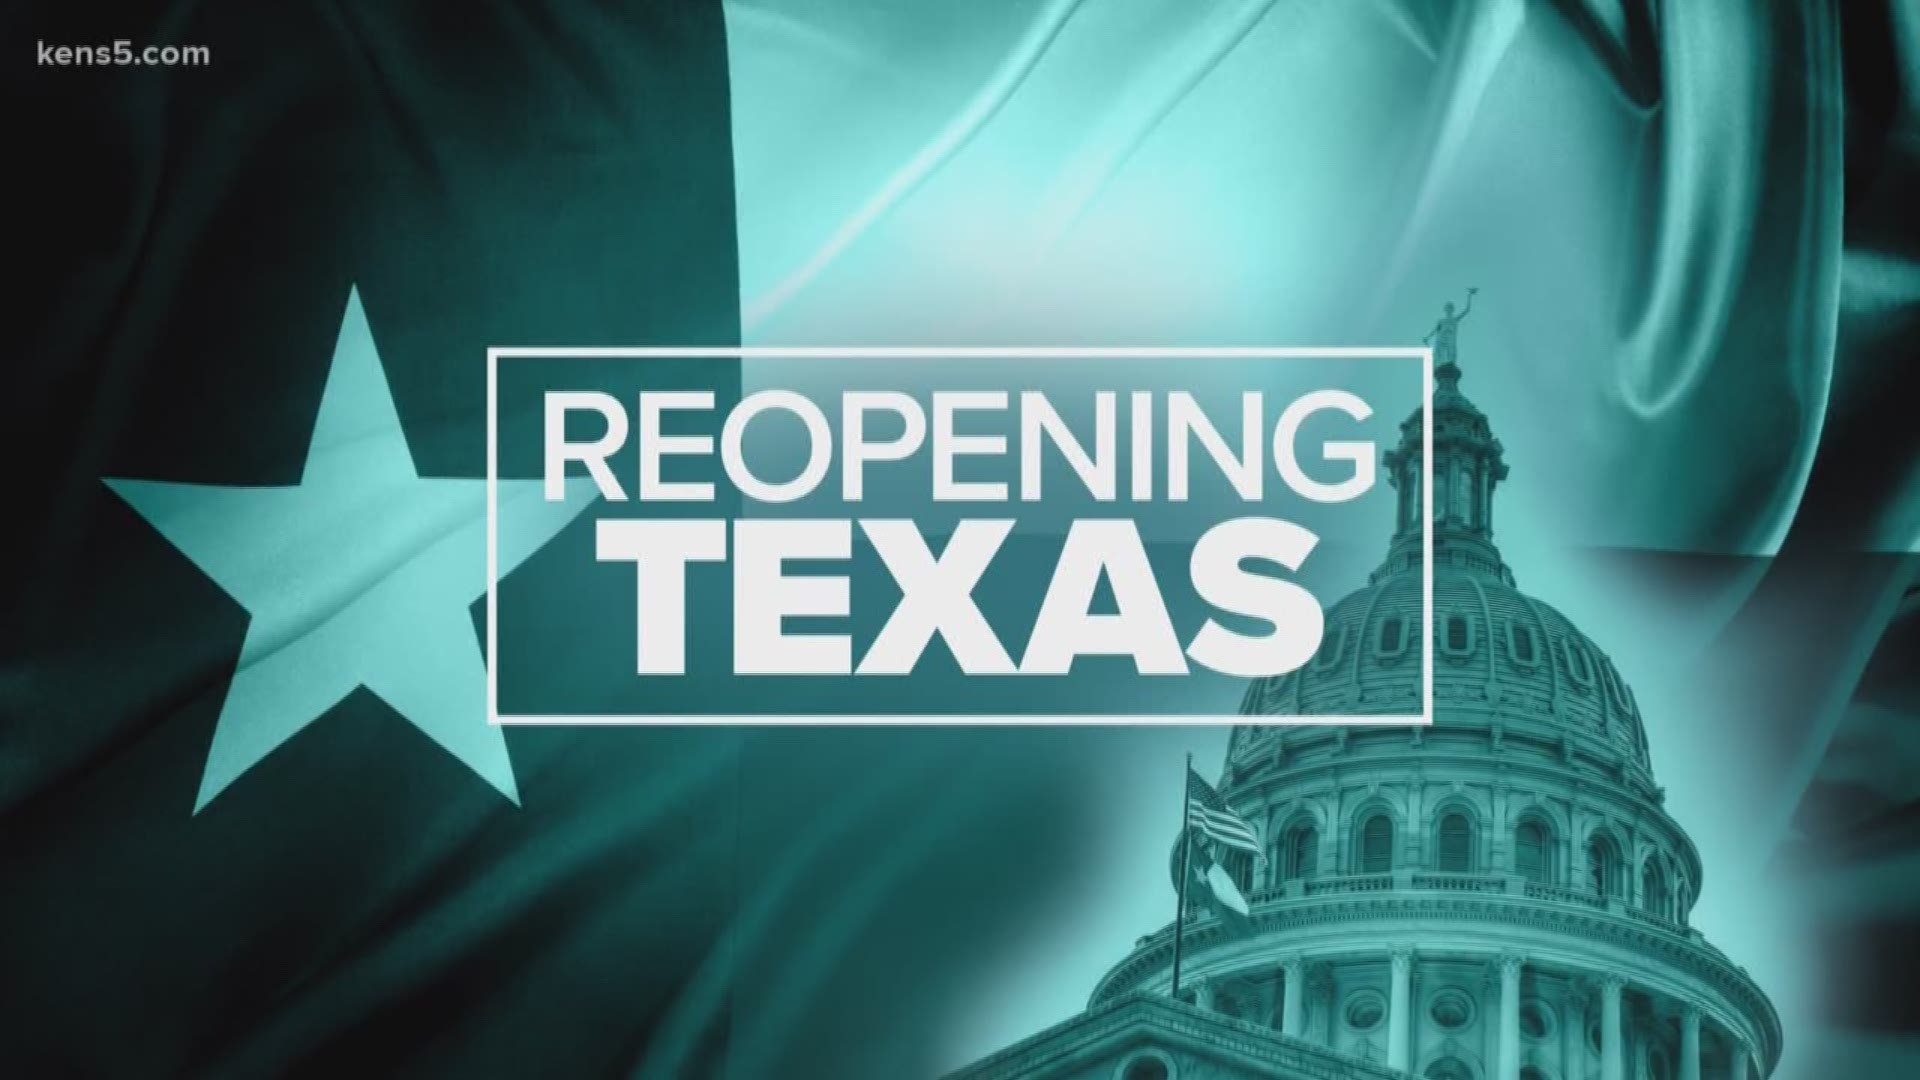 Gov. Greg Abbott announced his plan to reopen businesses across Texas on May 1.